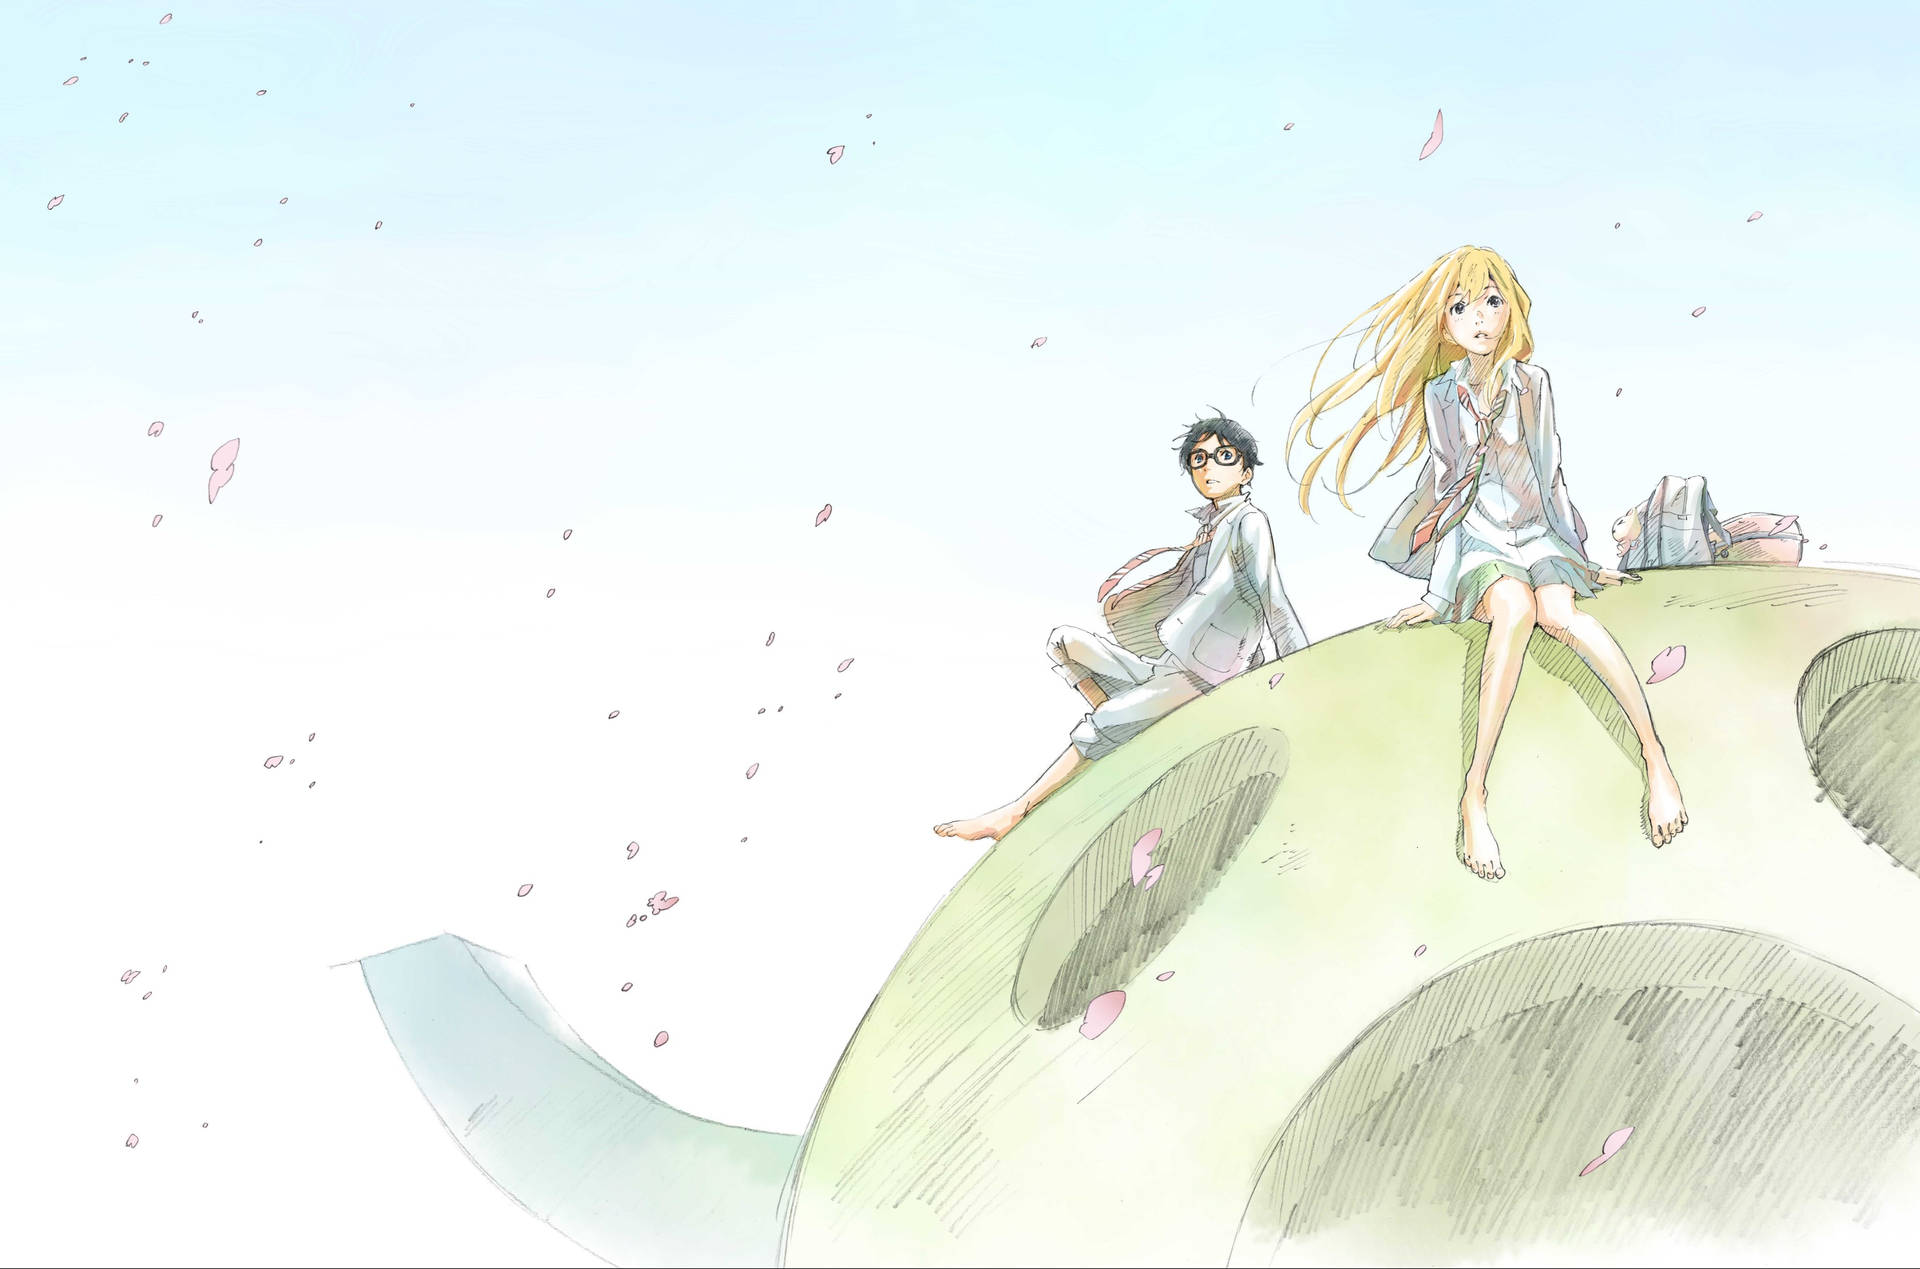 Kaori and Kosei embrace in a moment of peace and love Wallpaper